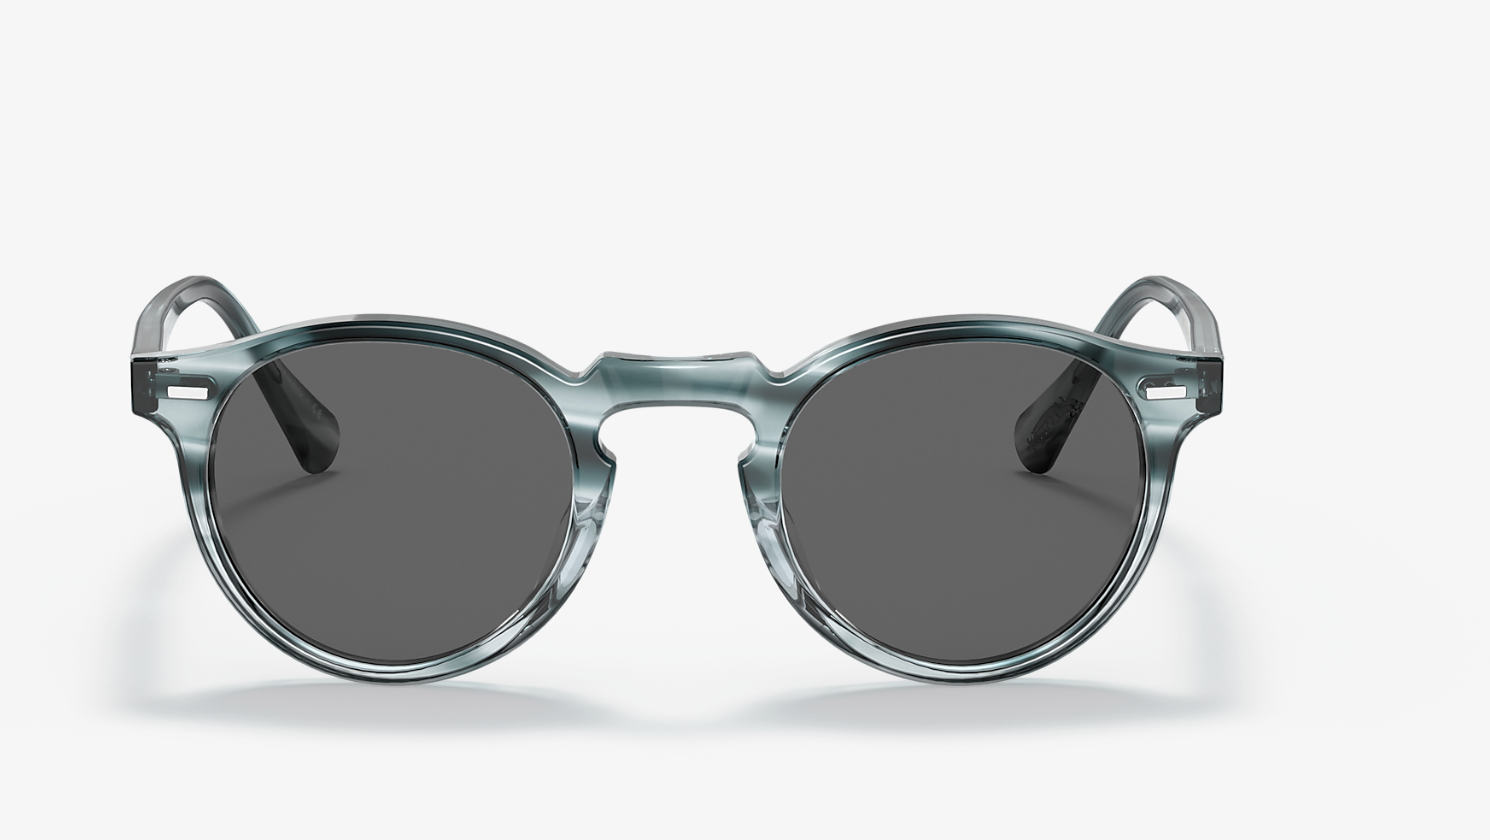 Oliver Peoples Gregory Peck Sun